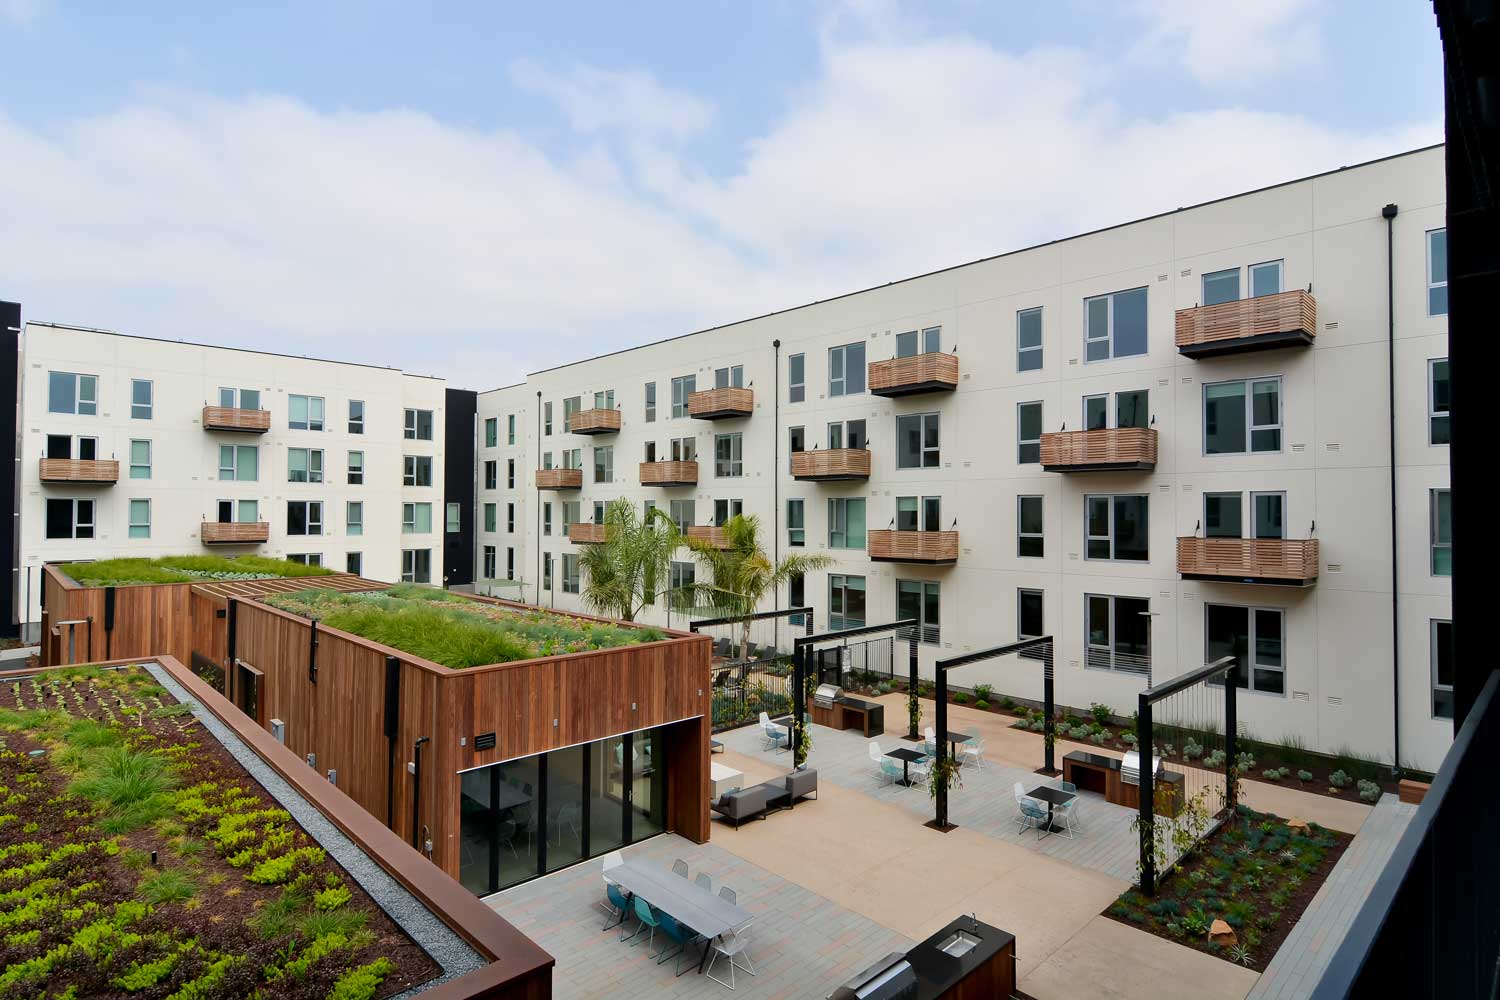 Union City California Apartments-The Union Flats Building Exterior with Lush Landscape and BBQ Grills